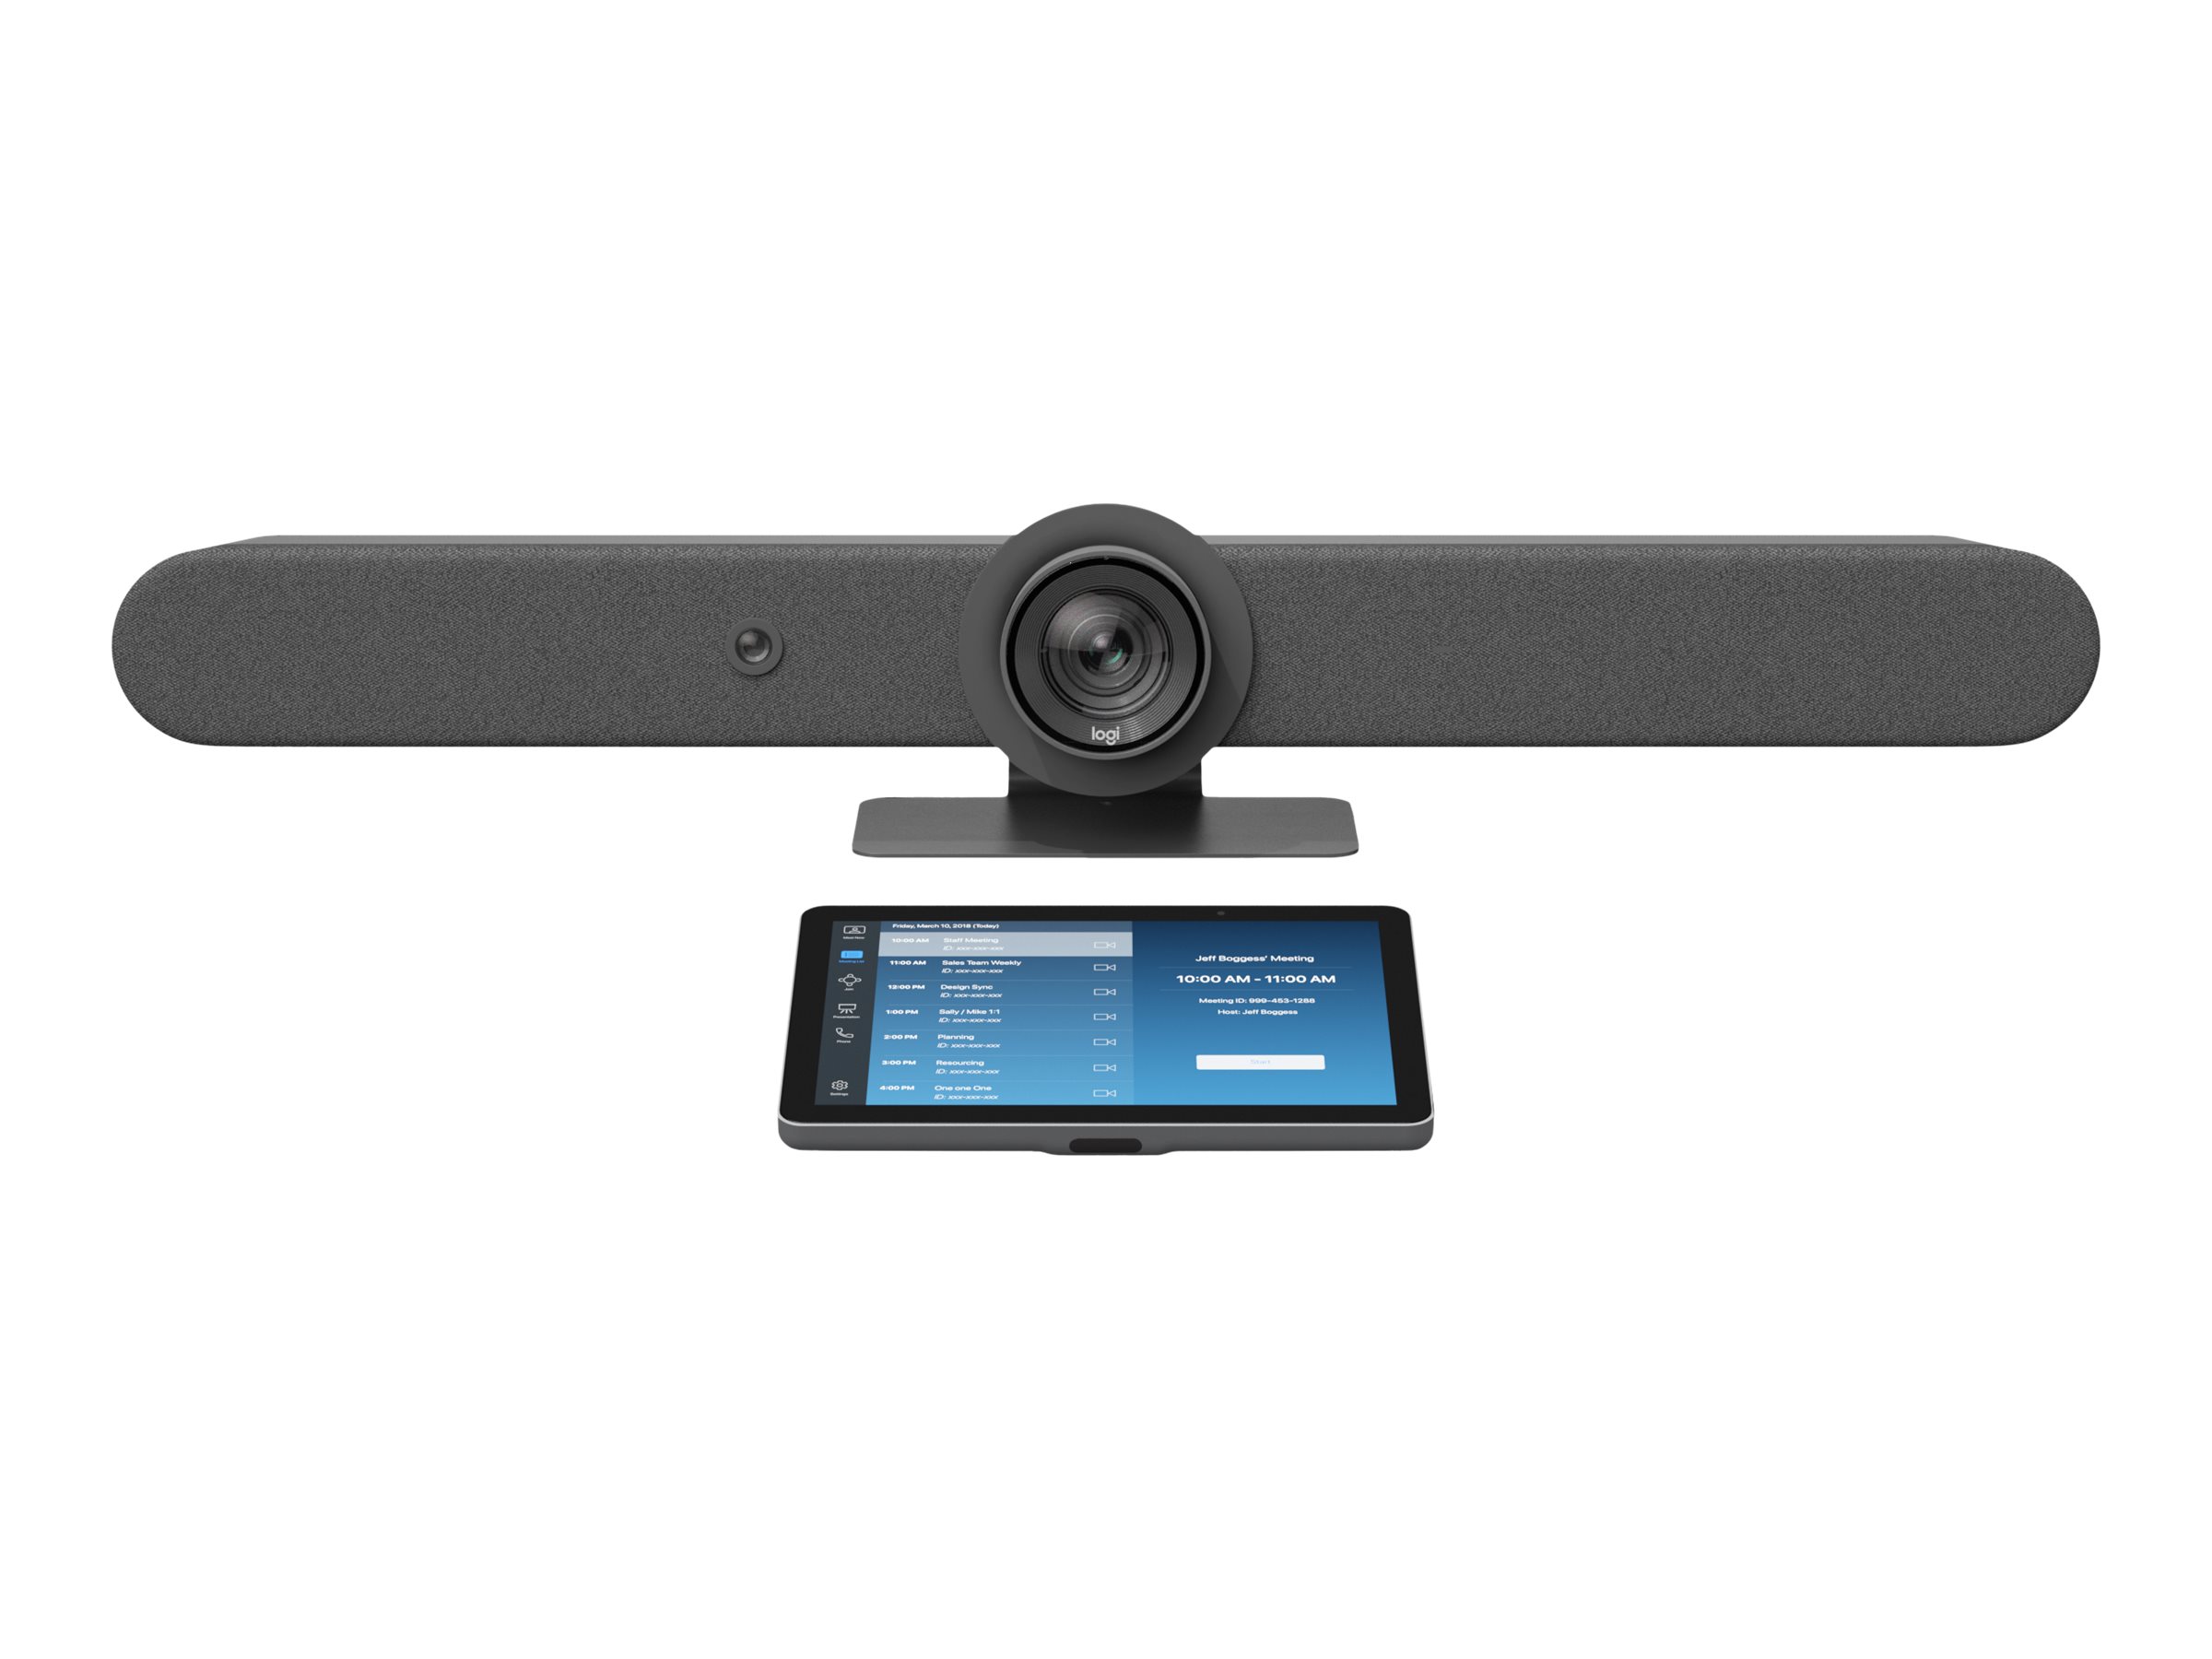 Logitech - Kit für Videokonferenzen (Logitech Tap IP, Logitech Rally Bar) - Certified for Zoom Rooms, Certified for Microsoft Teams Rooms, RingCentral Certified, Tencent Meeting Certified - Graphite